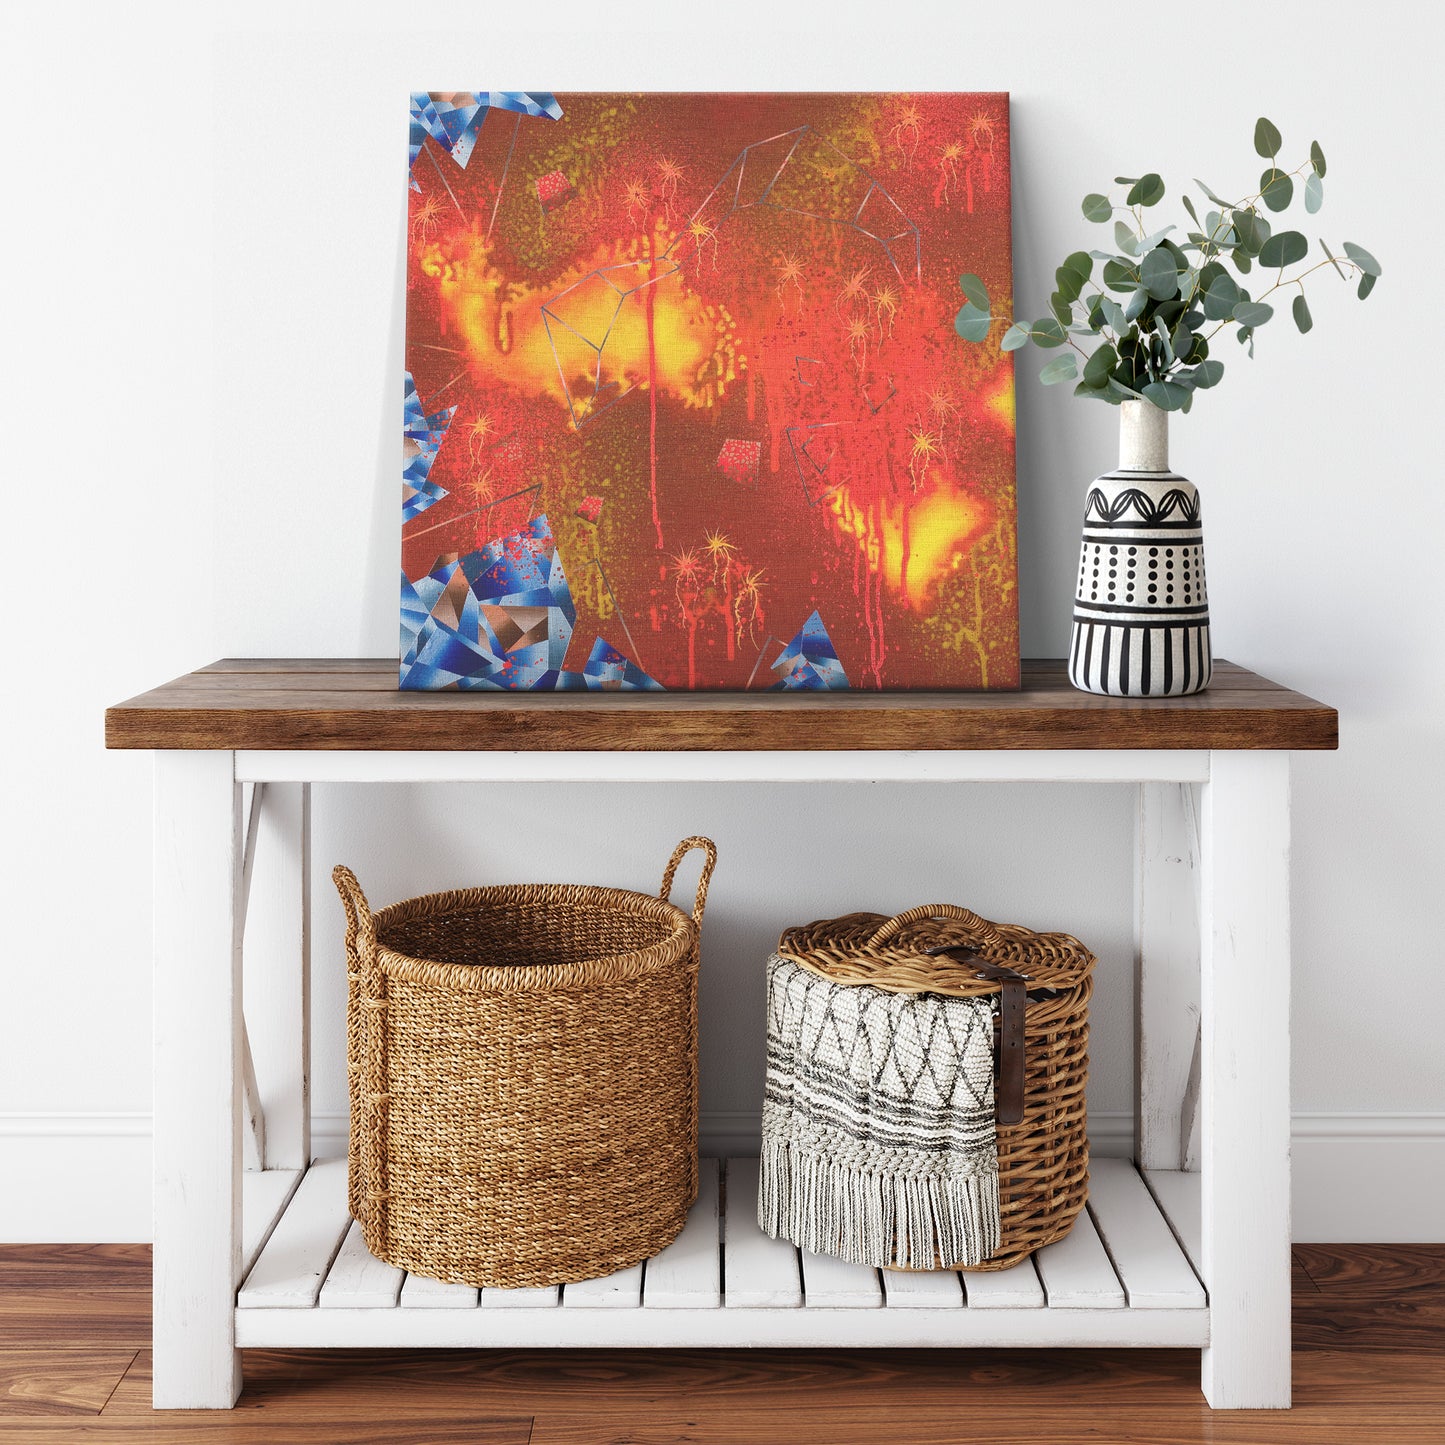 the best abstract art and decor at affordable prices from Carini Arts